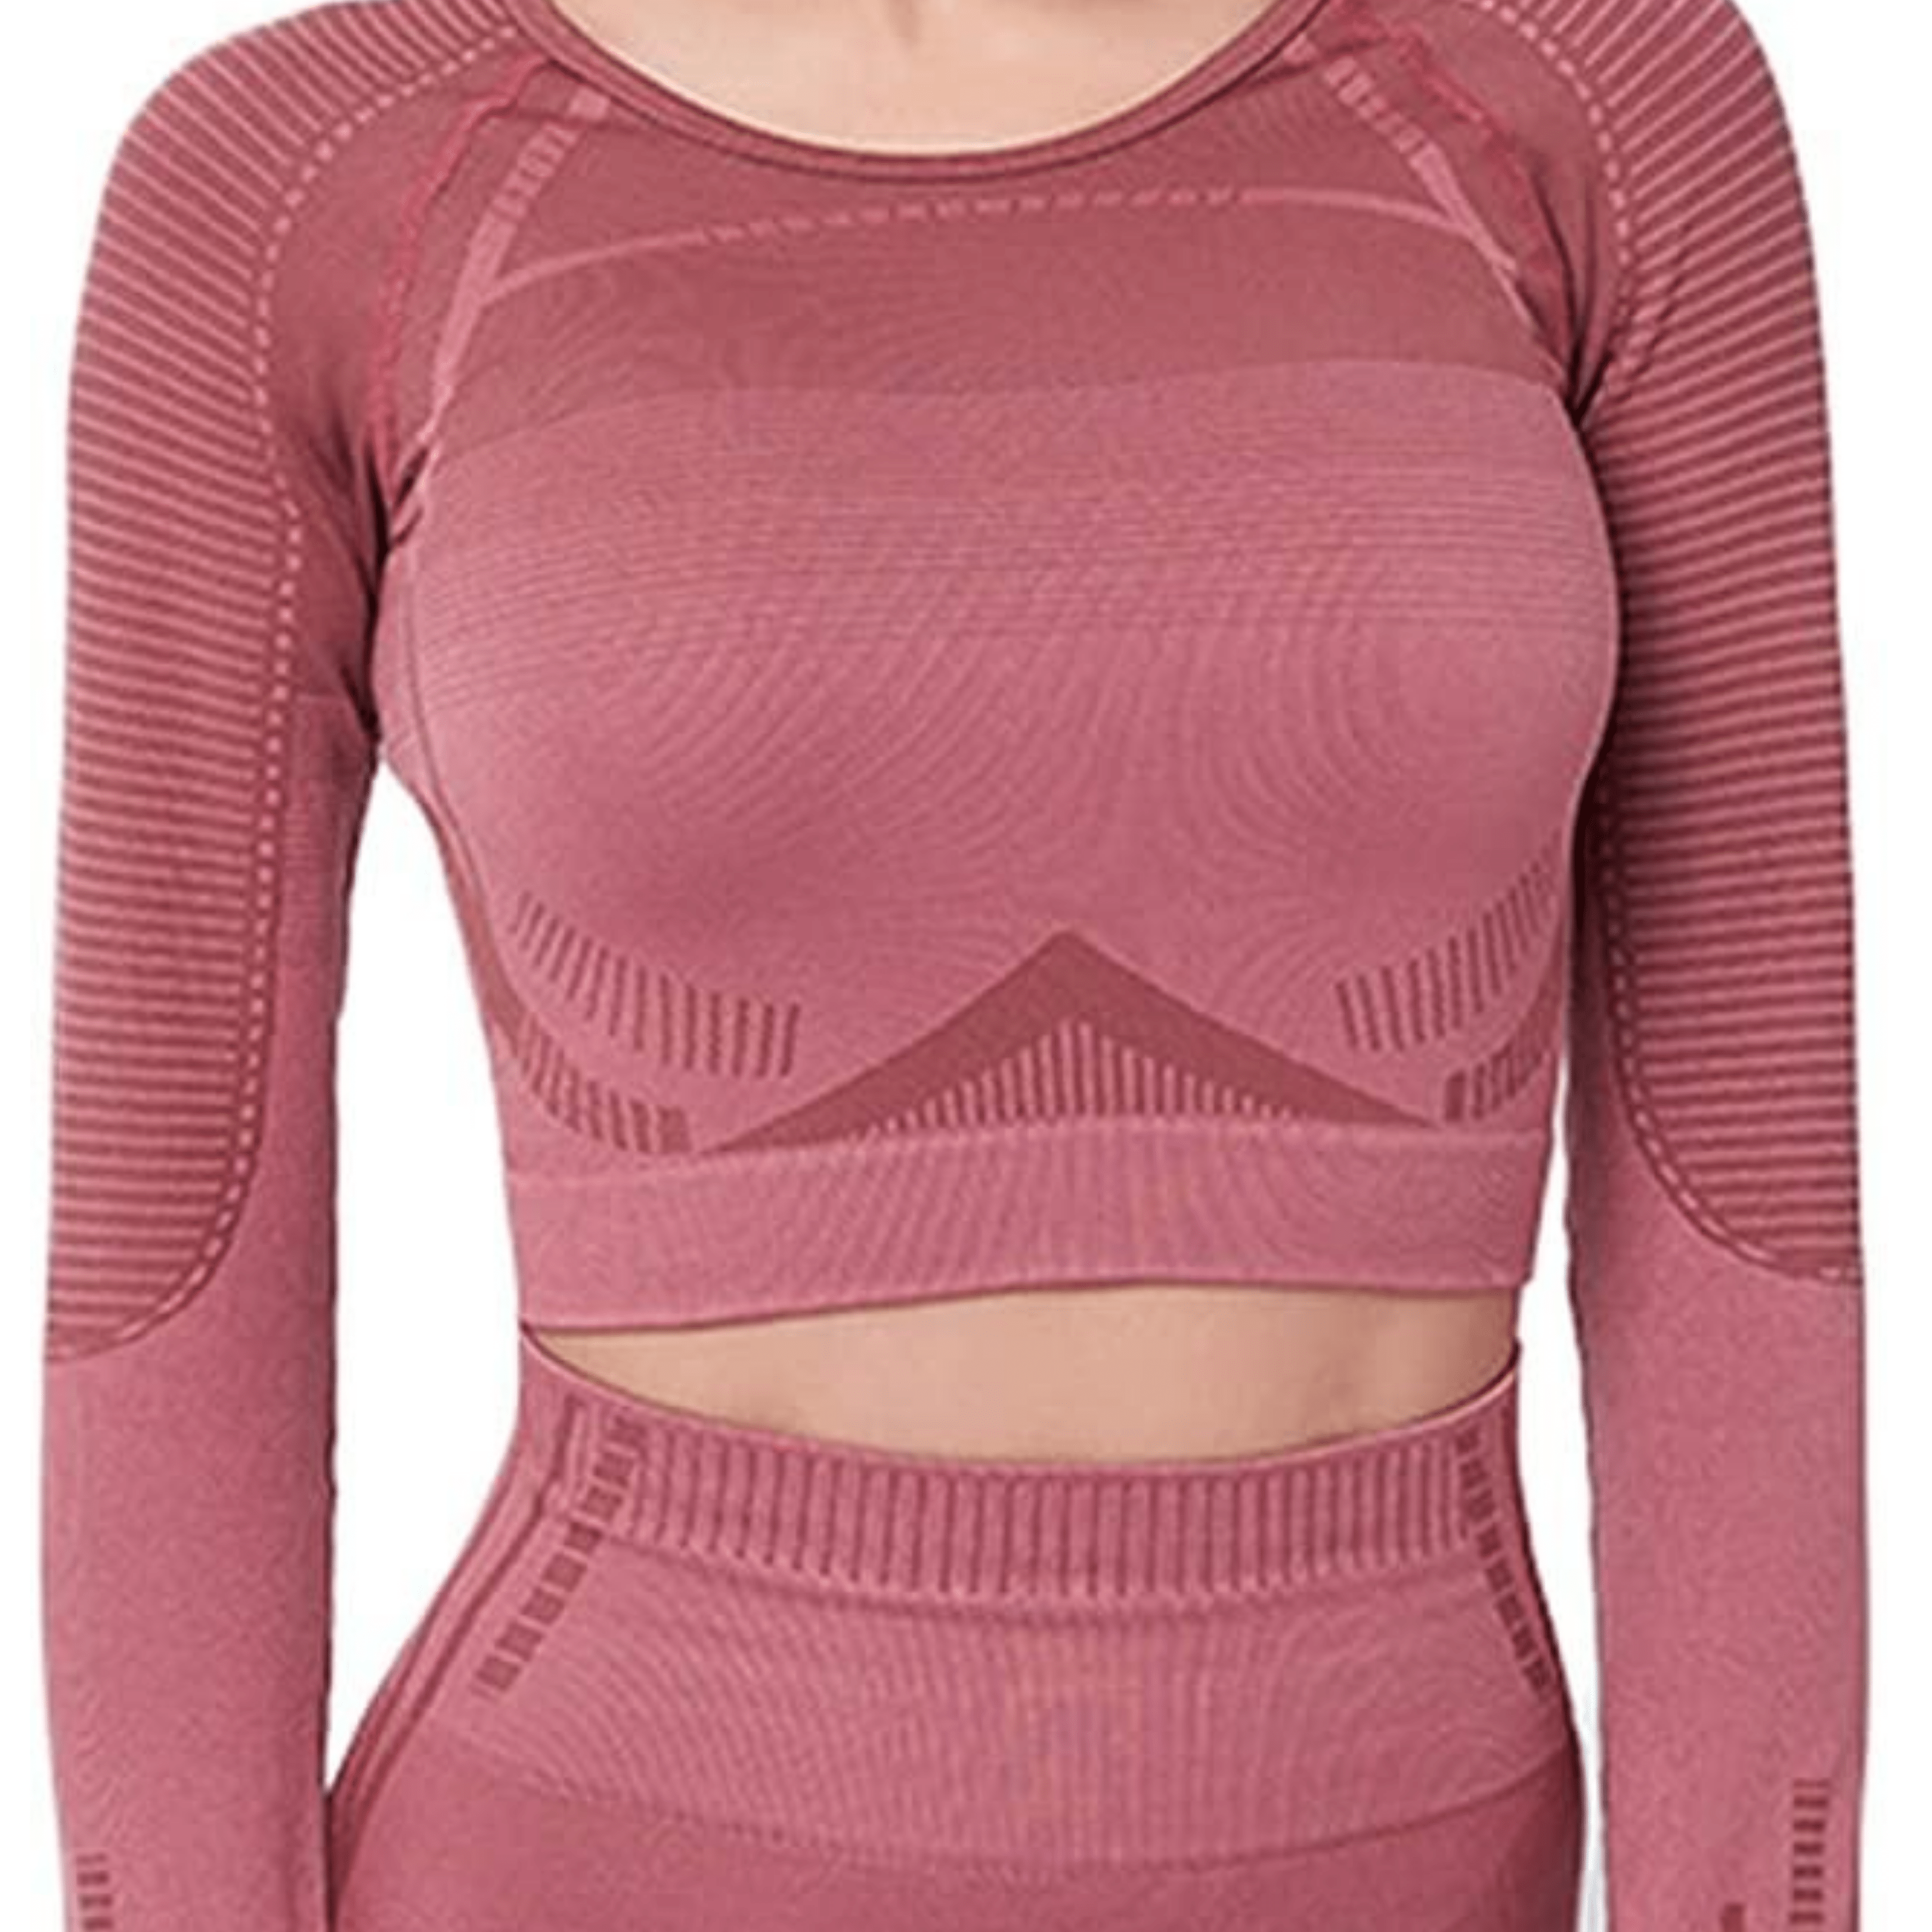 Rosy Brown Workout Geometric Seamless Crop Top